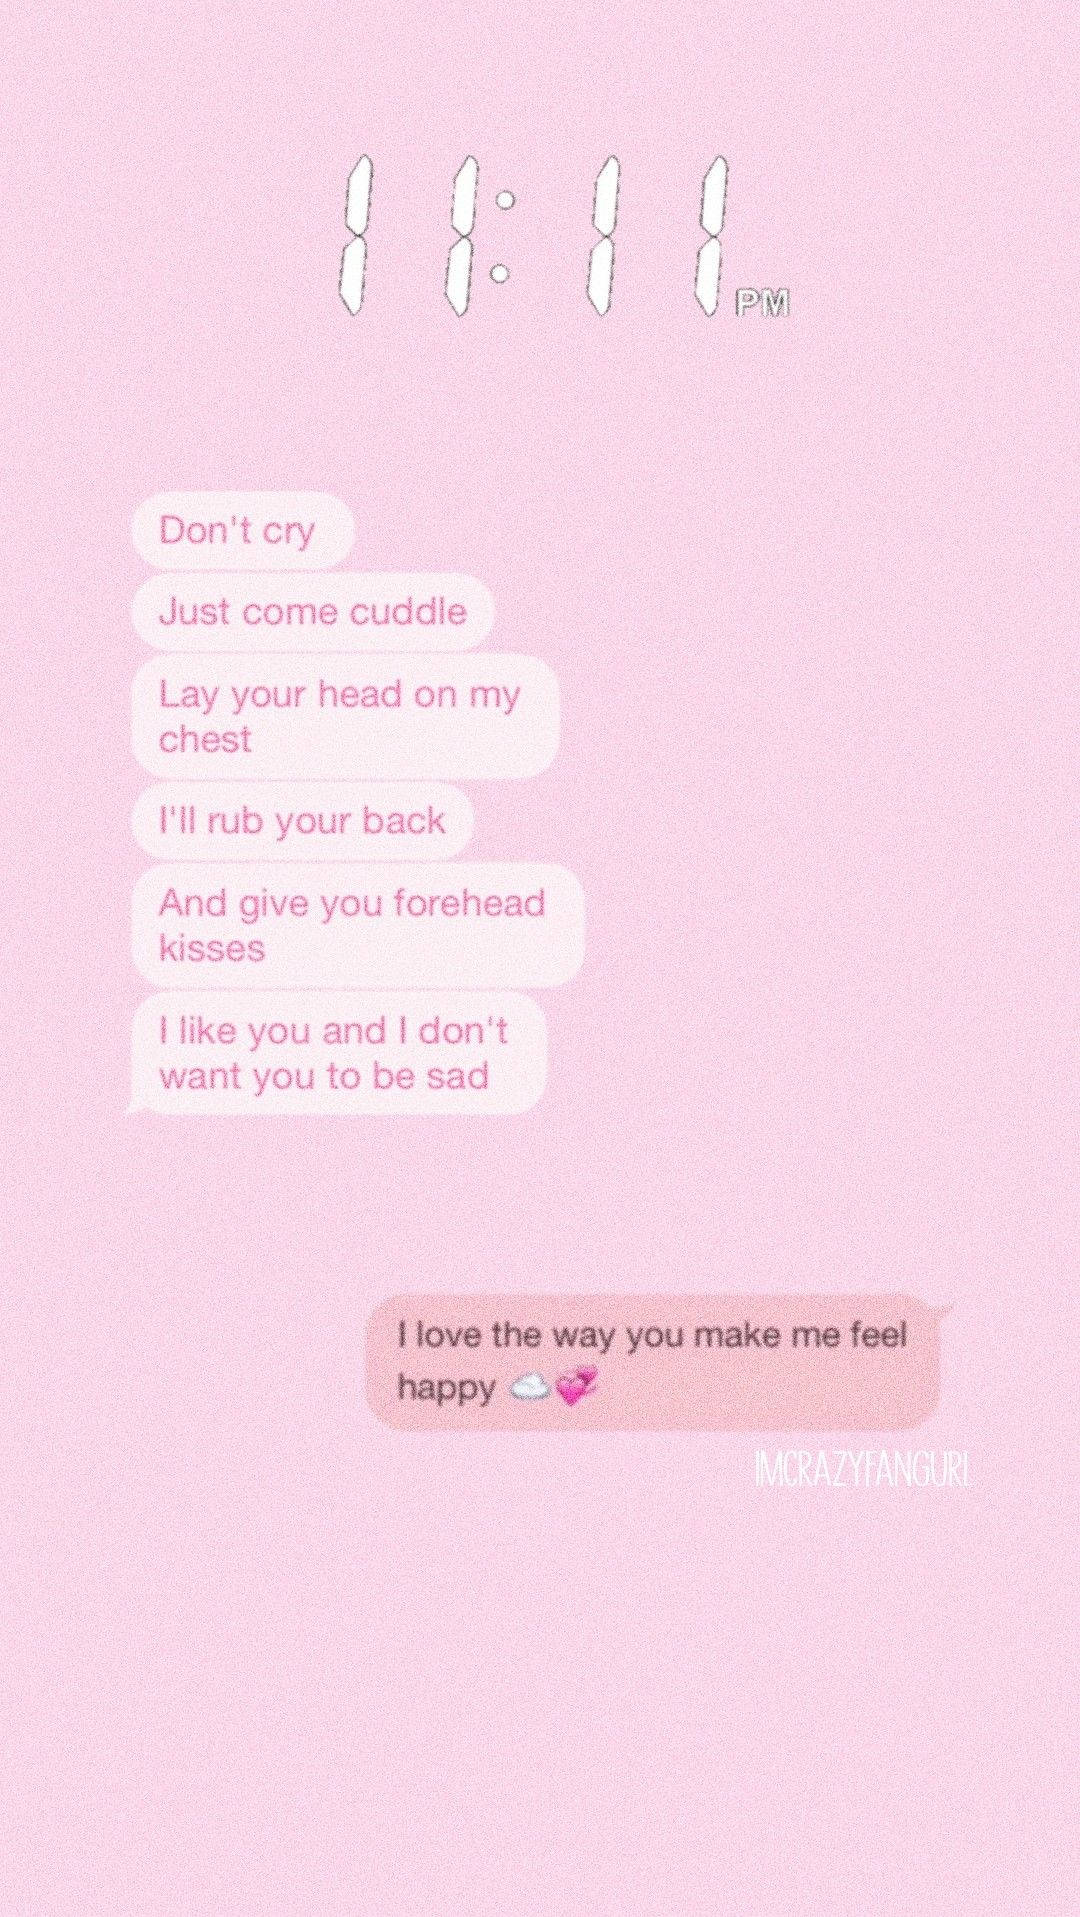 Cute Pink Aesthetic Sweet Text Message Picture